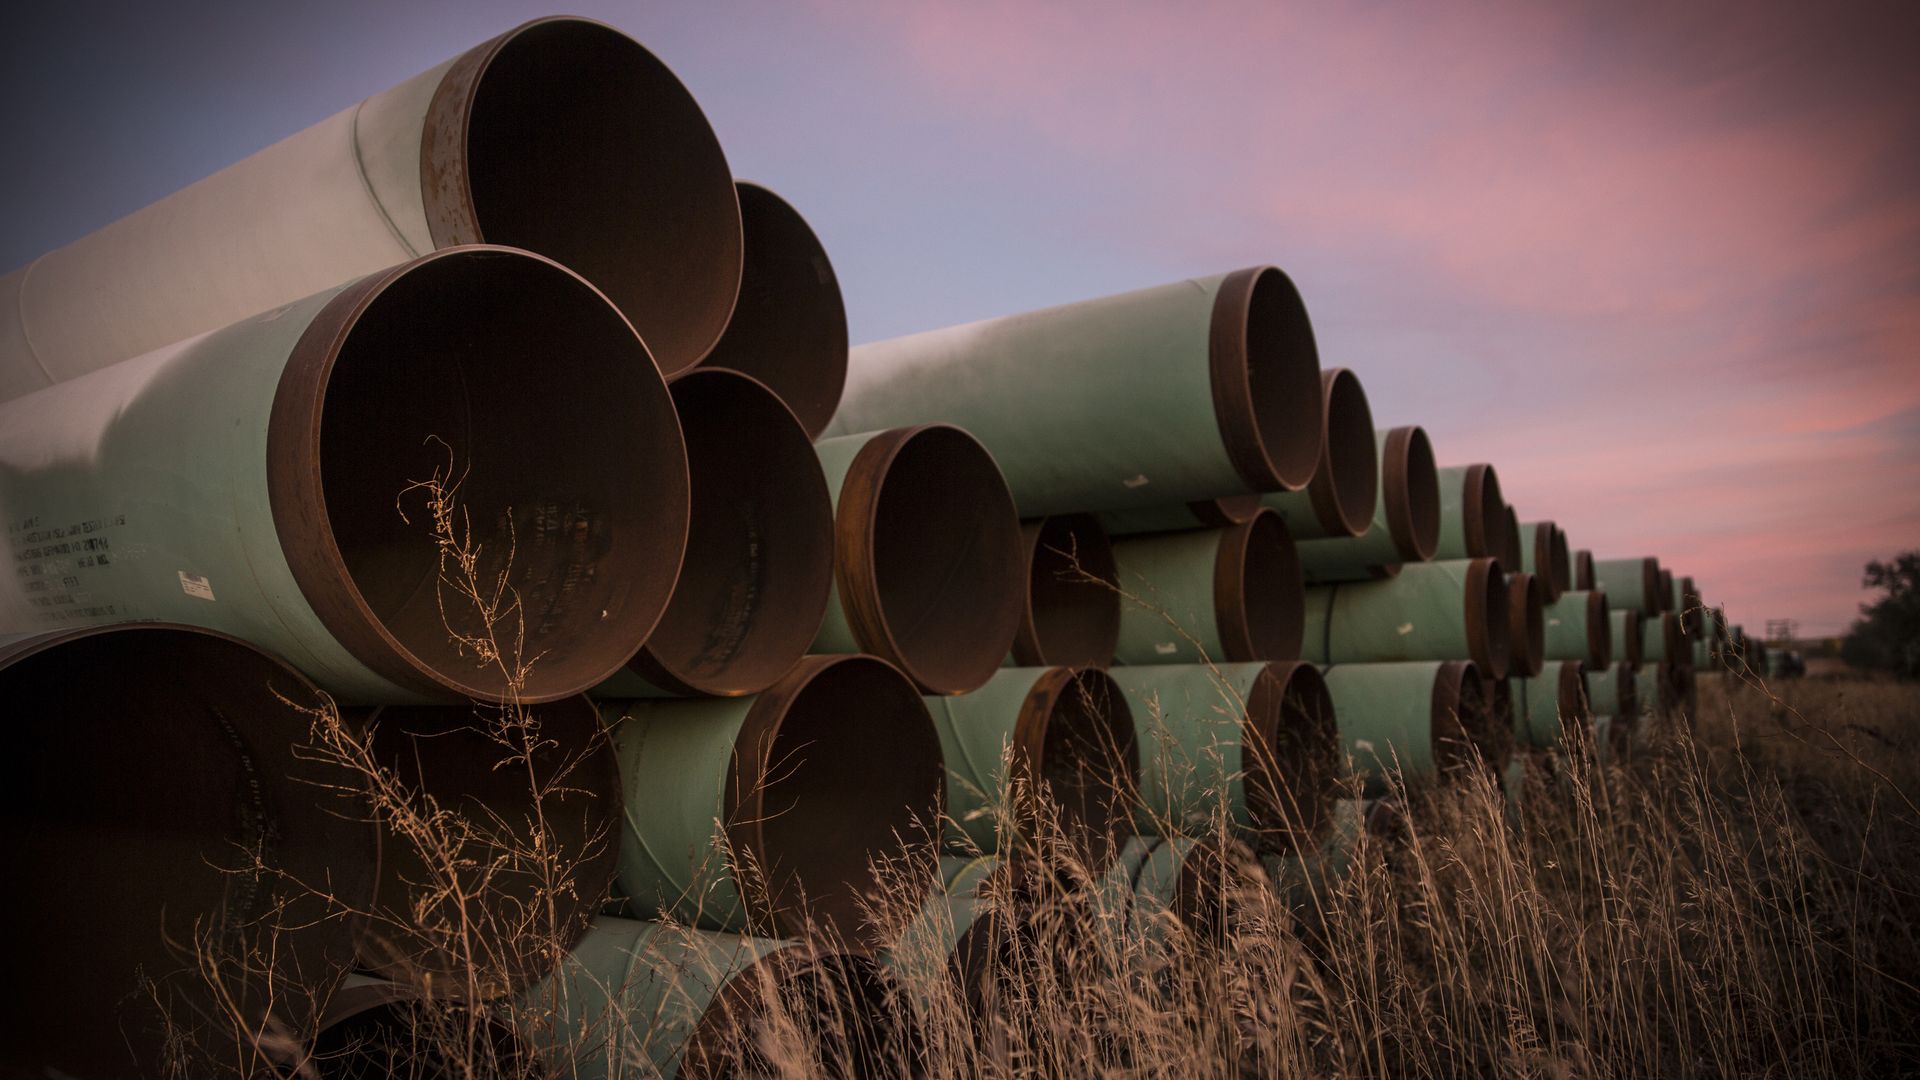  Miles of unused pipe, prepared for the proposed Keystone XL pipeline.